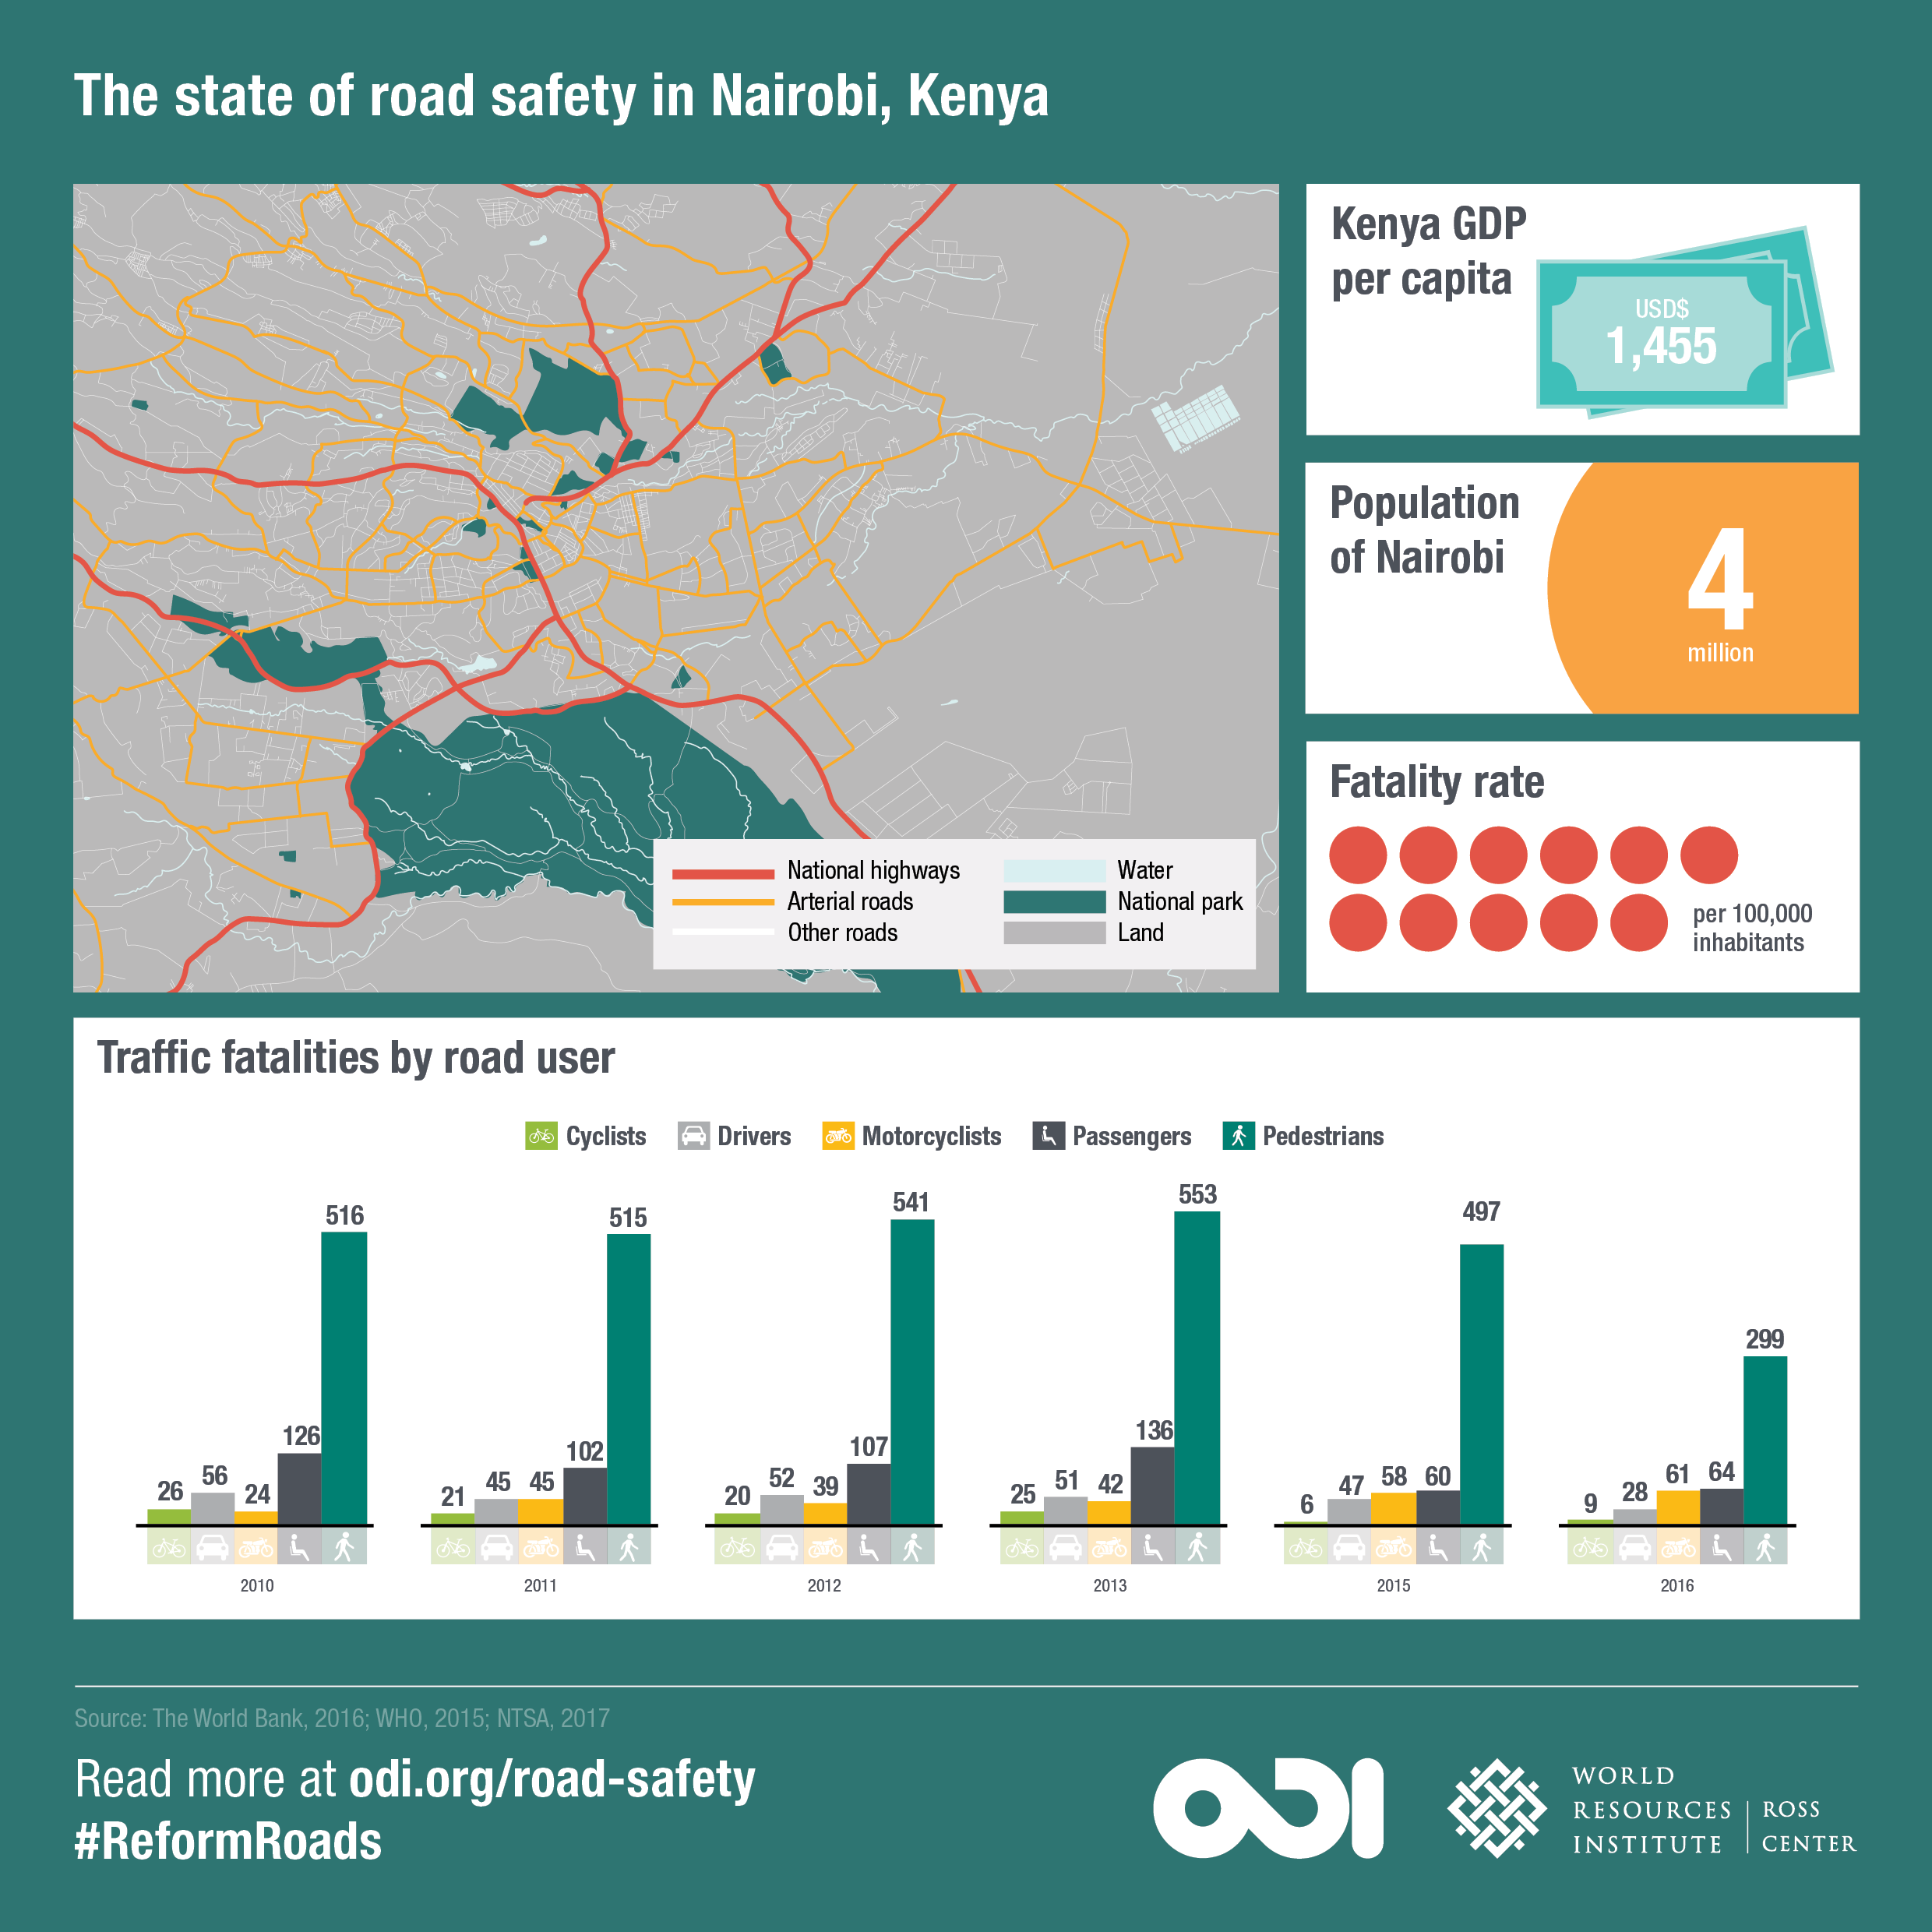 The state of road safety in Nairobi. Image: ODI and WRI